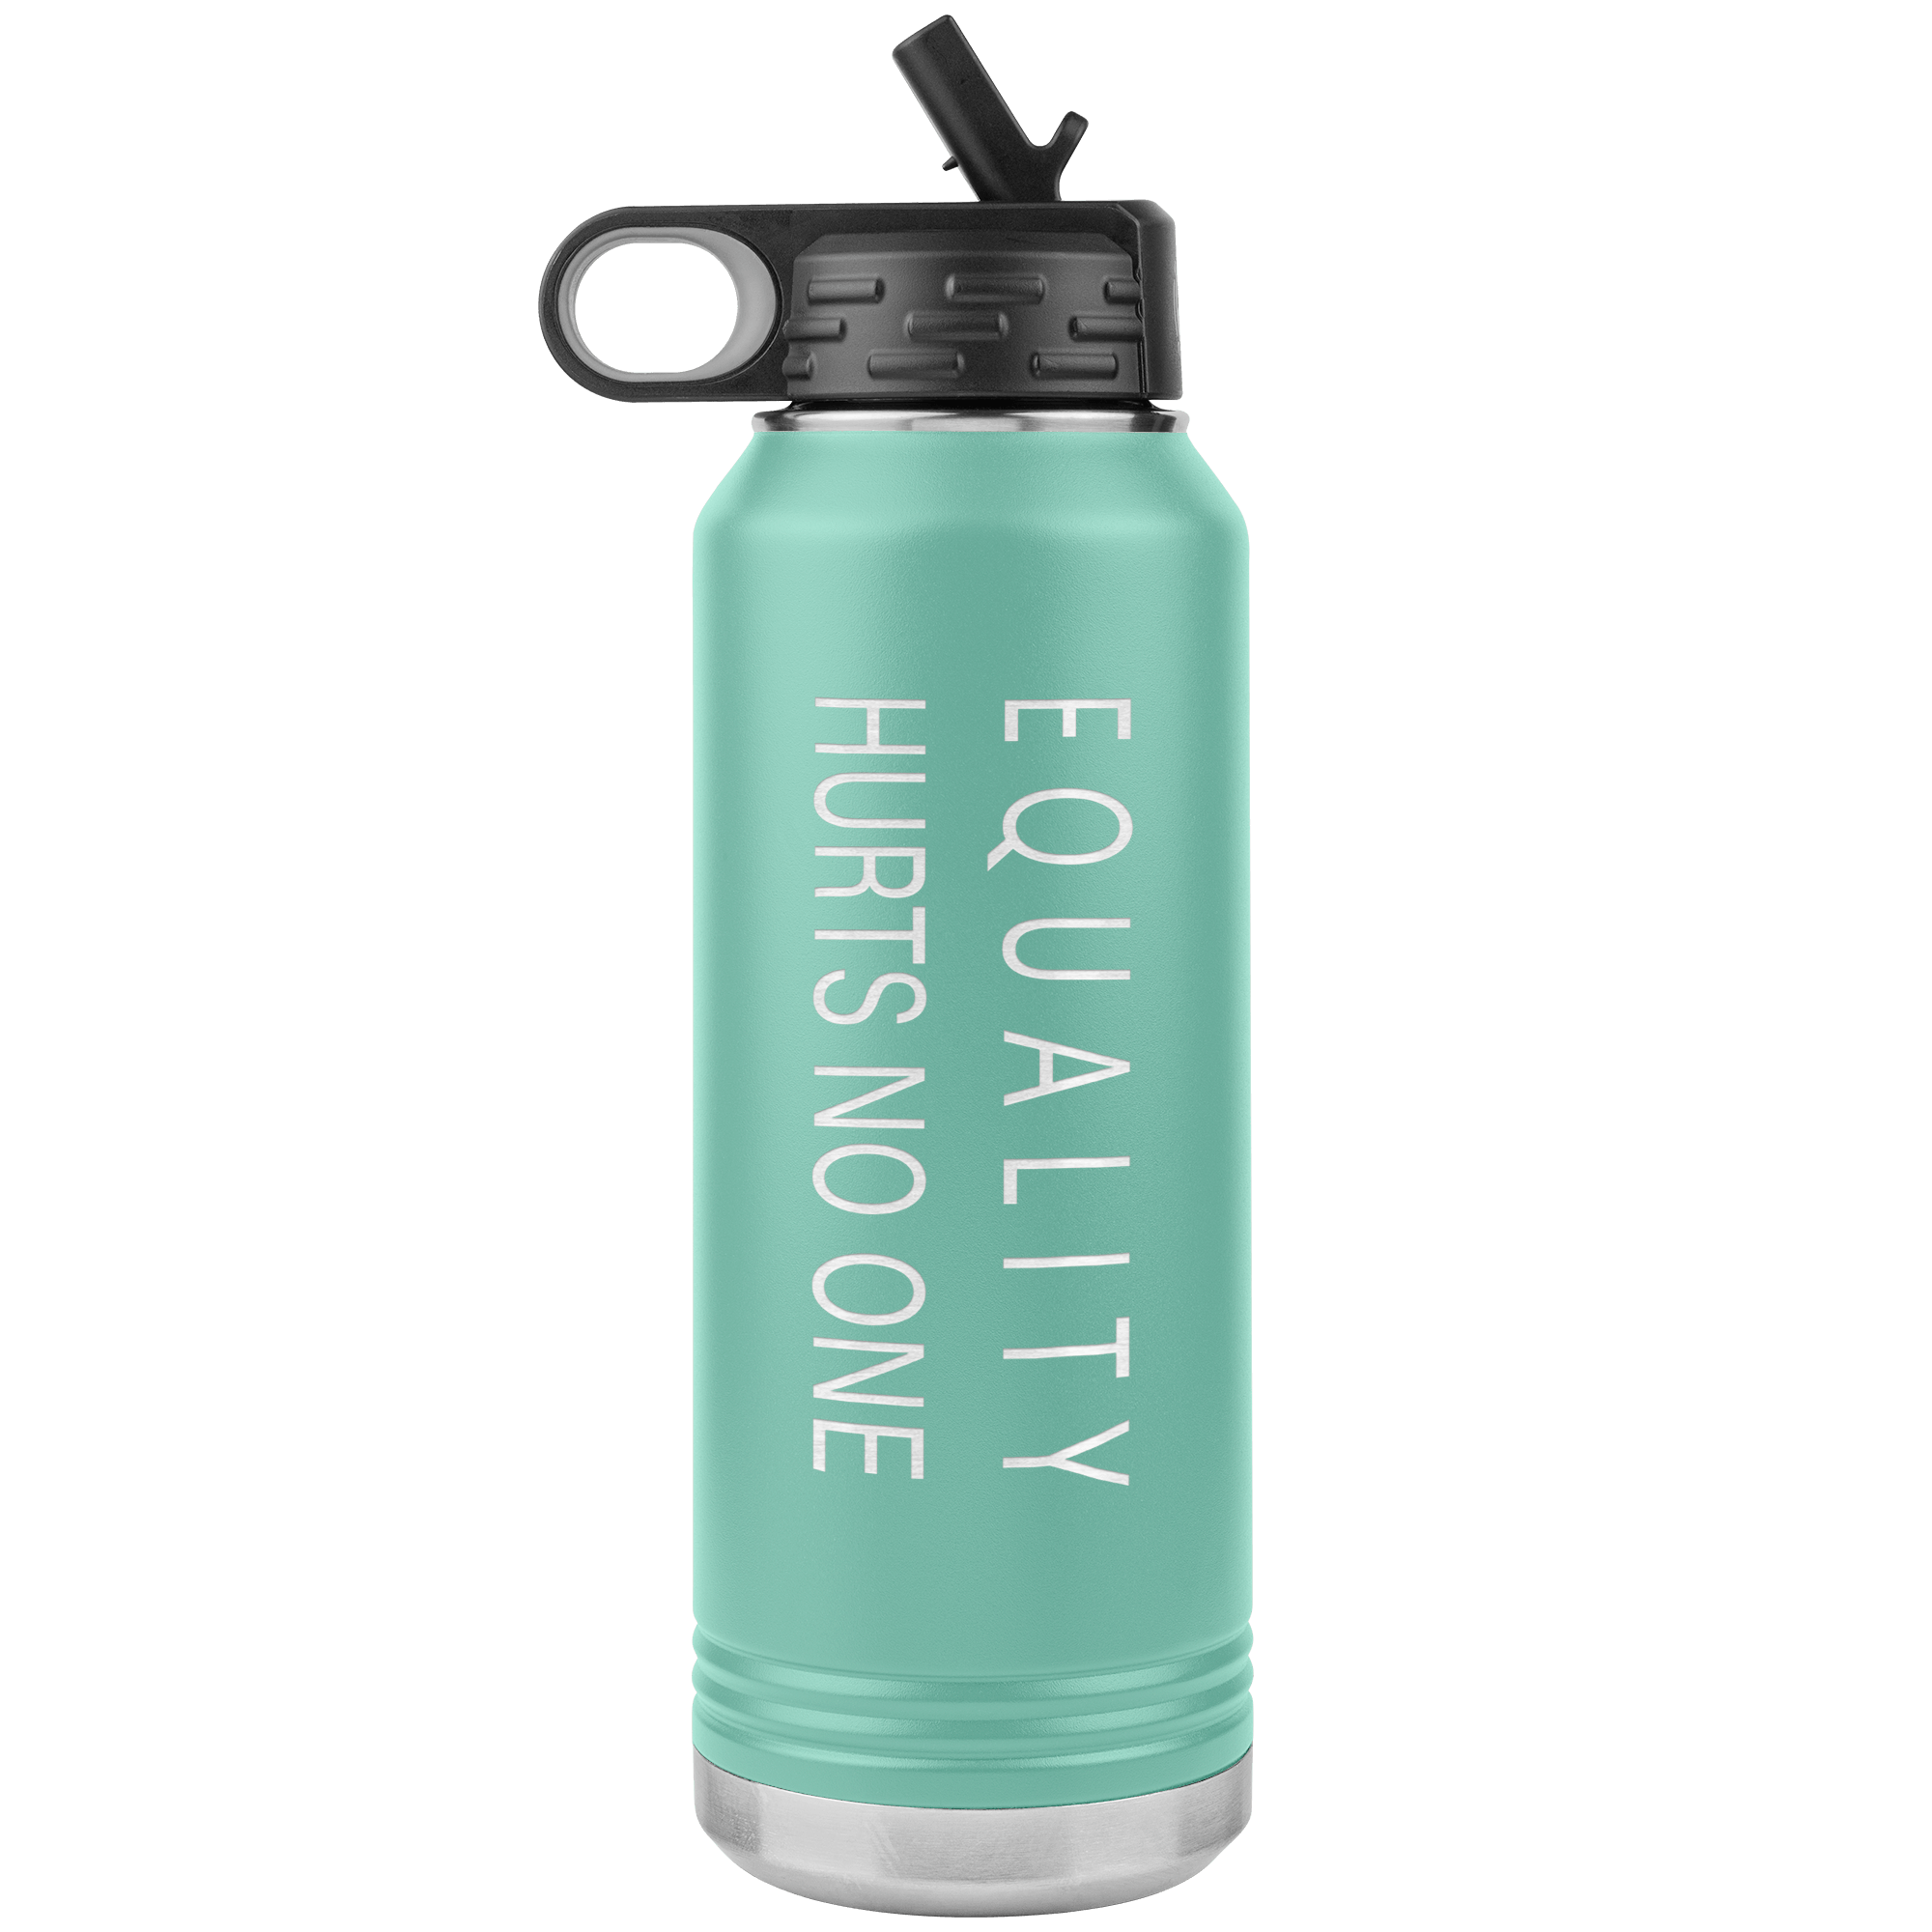 "Equality Hurts No One", Water Bottle.